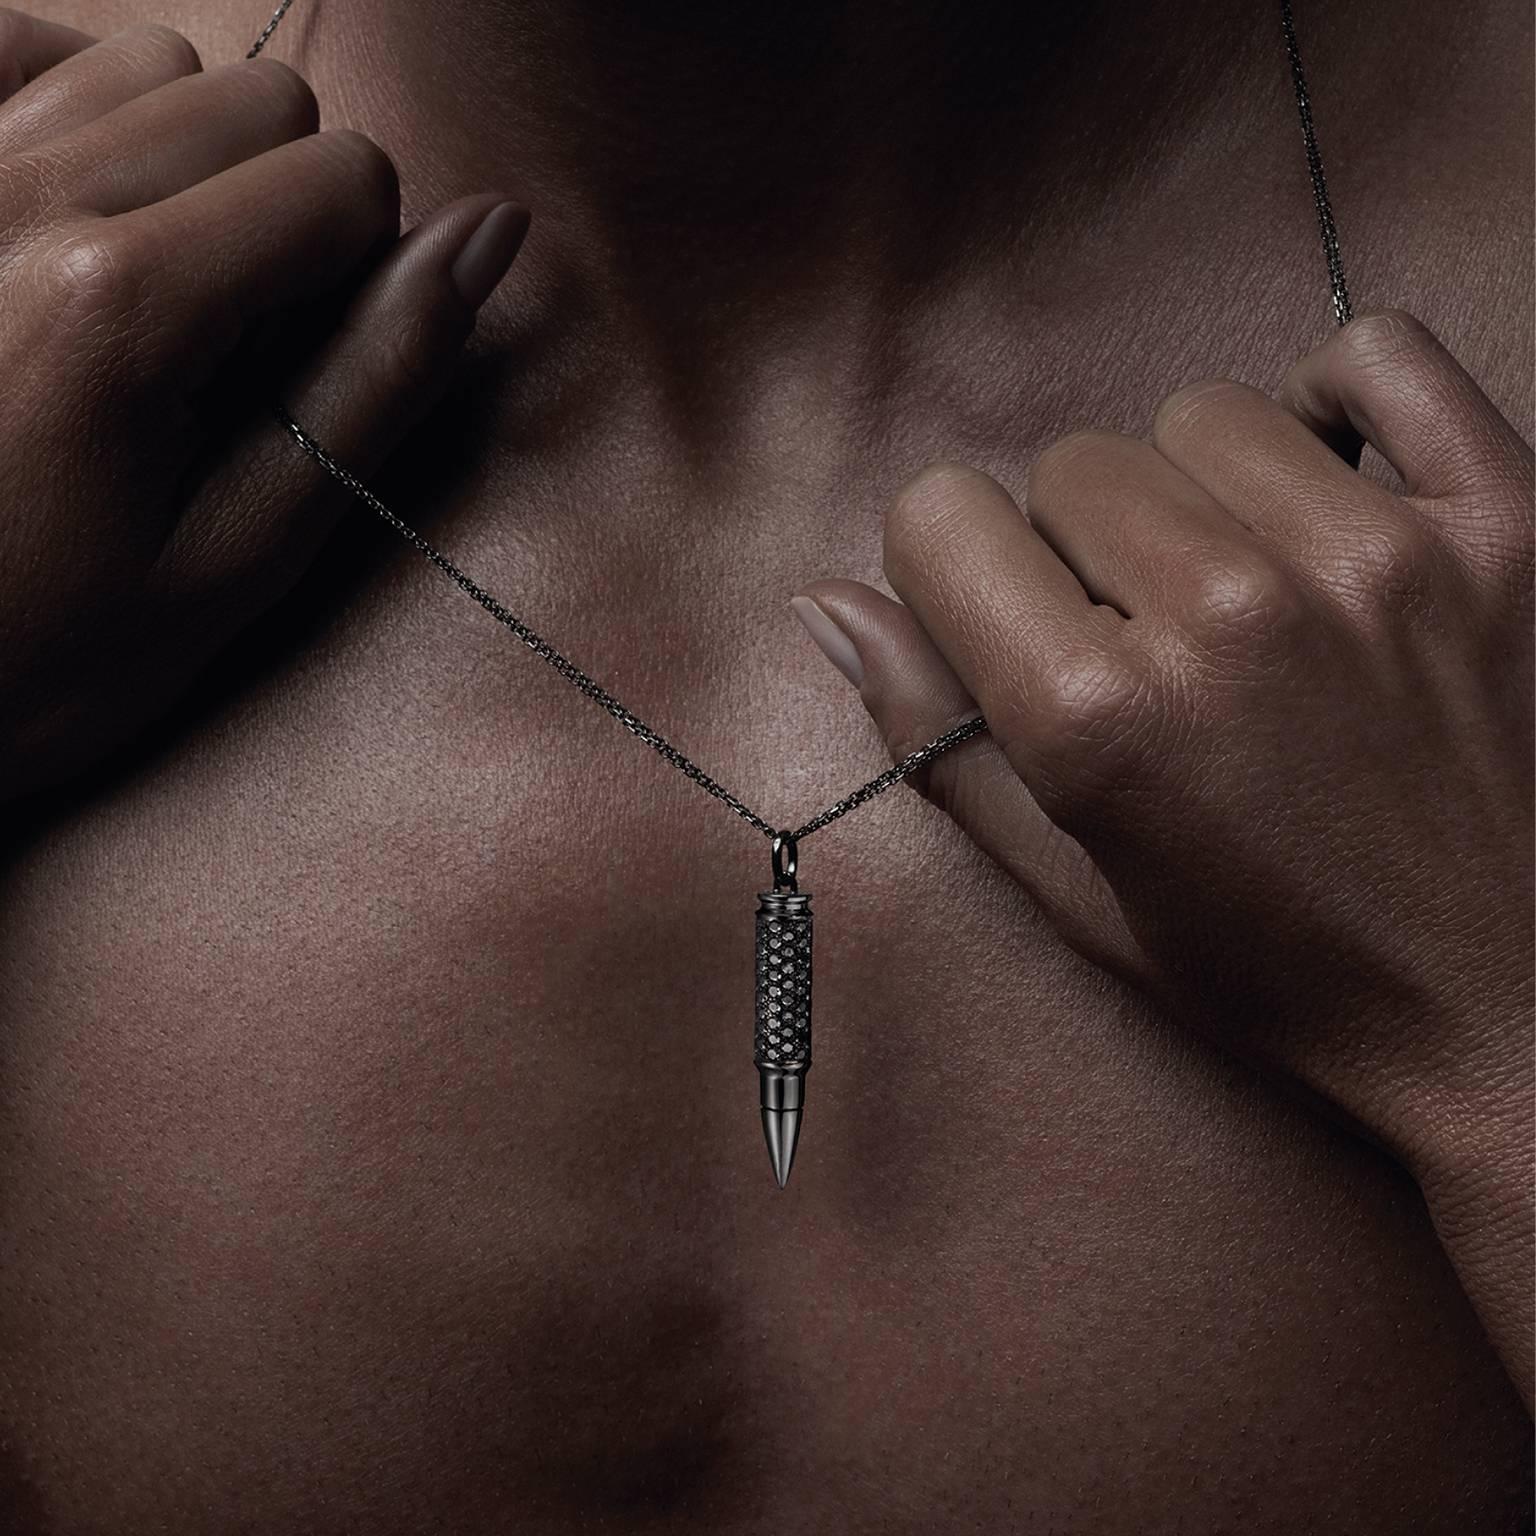 Titanium AKILLIS Fatal Attraction pendant 
The indicated price includes the Simple Belcher Silver chain of 60-65 cm.

The powerfully symbolic pendants of the Fatal Attraction Collection always hit their mark! Cast in white, pink or yellow gold at